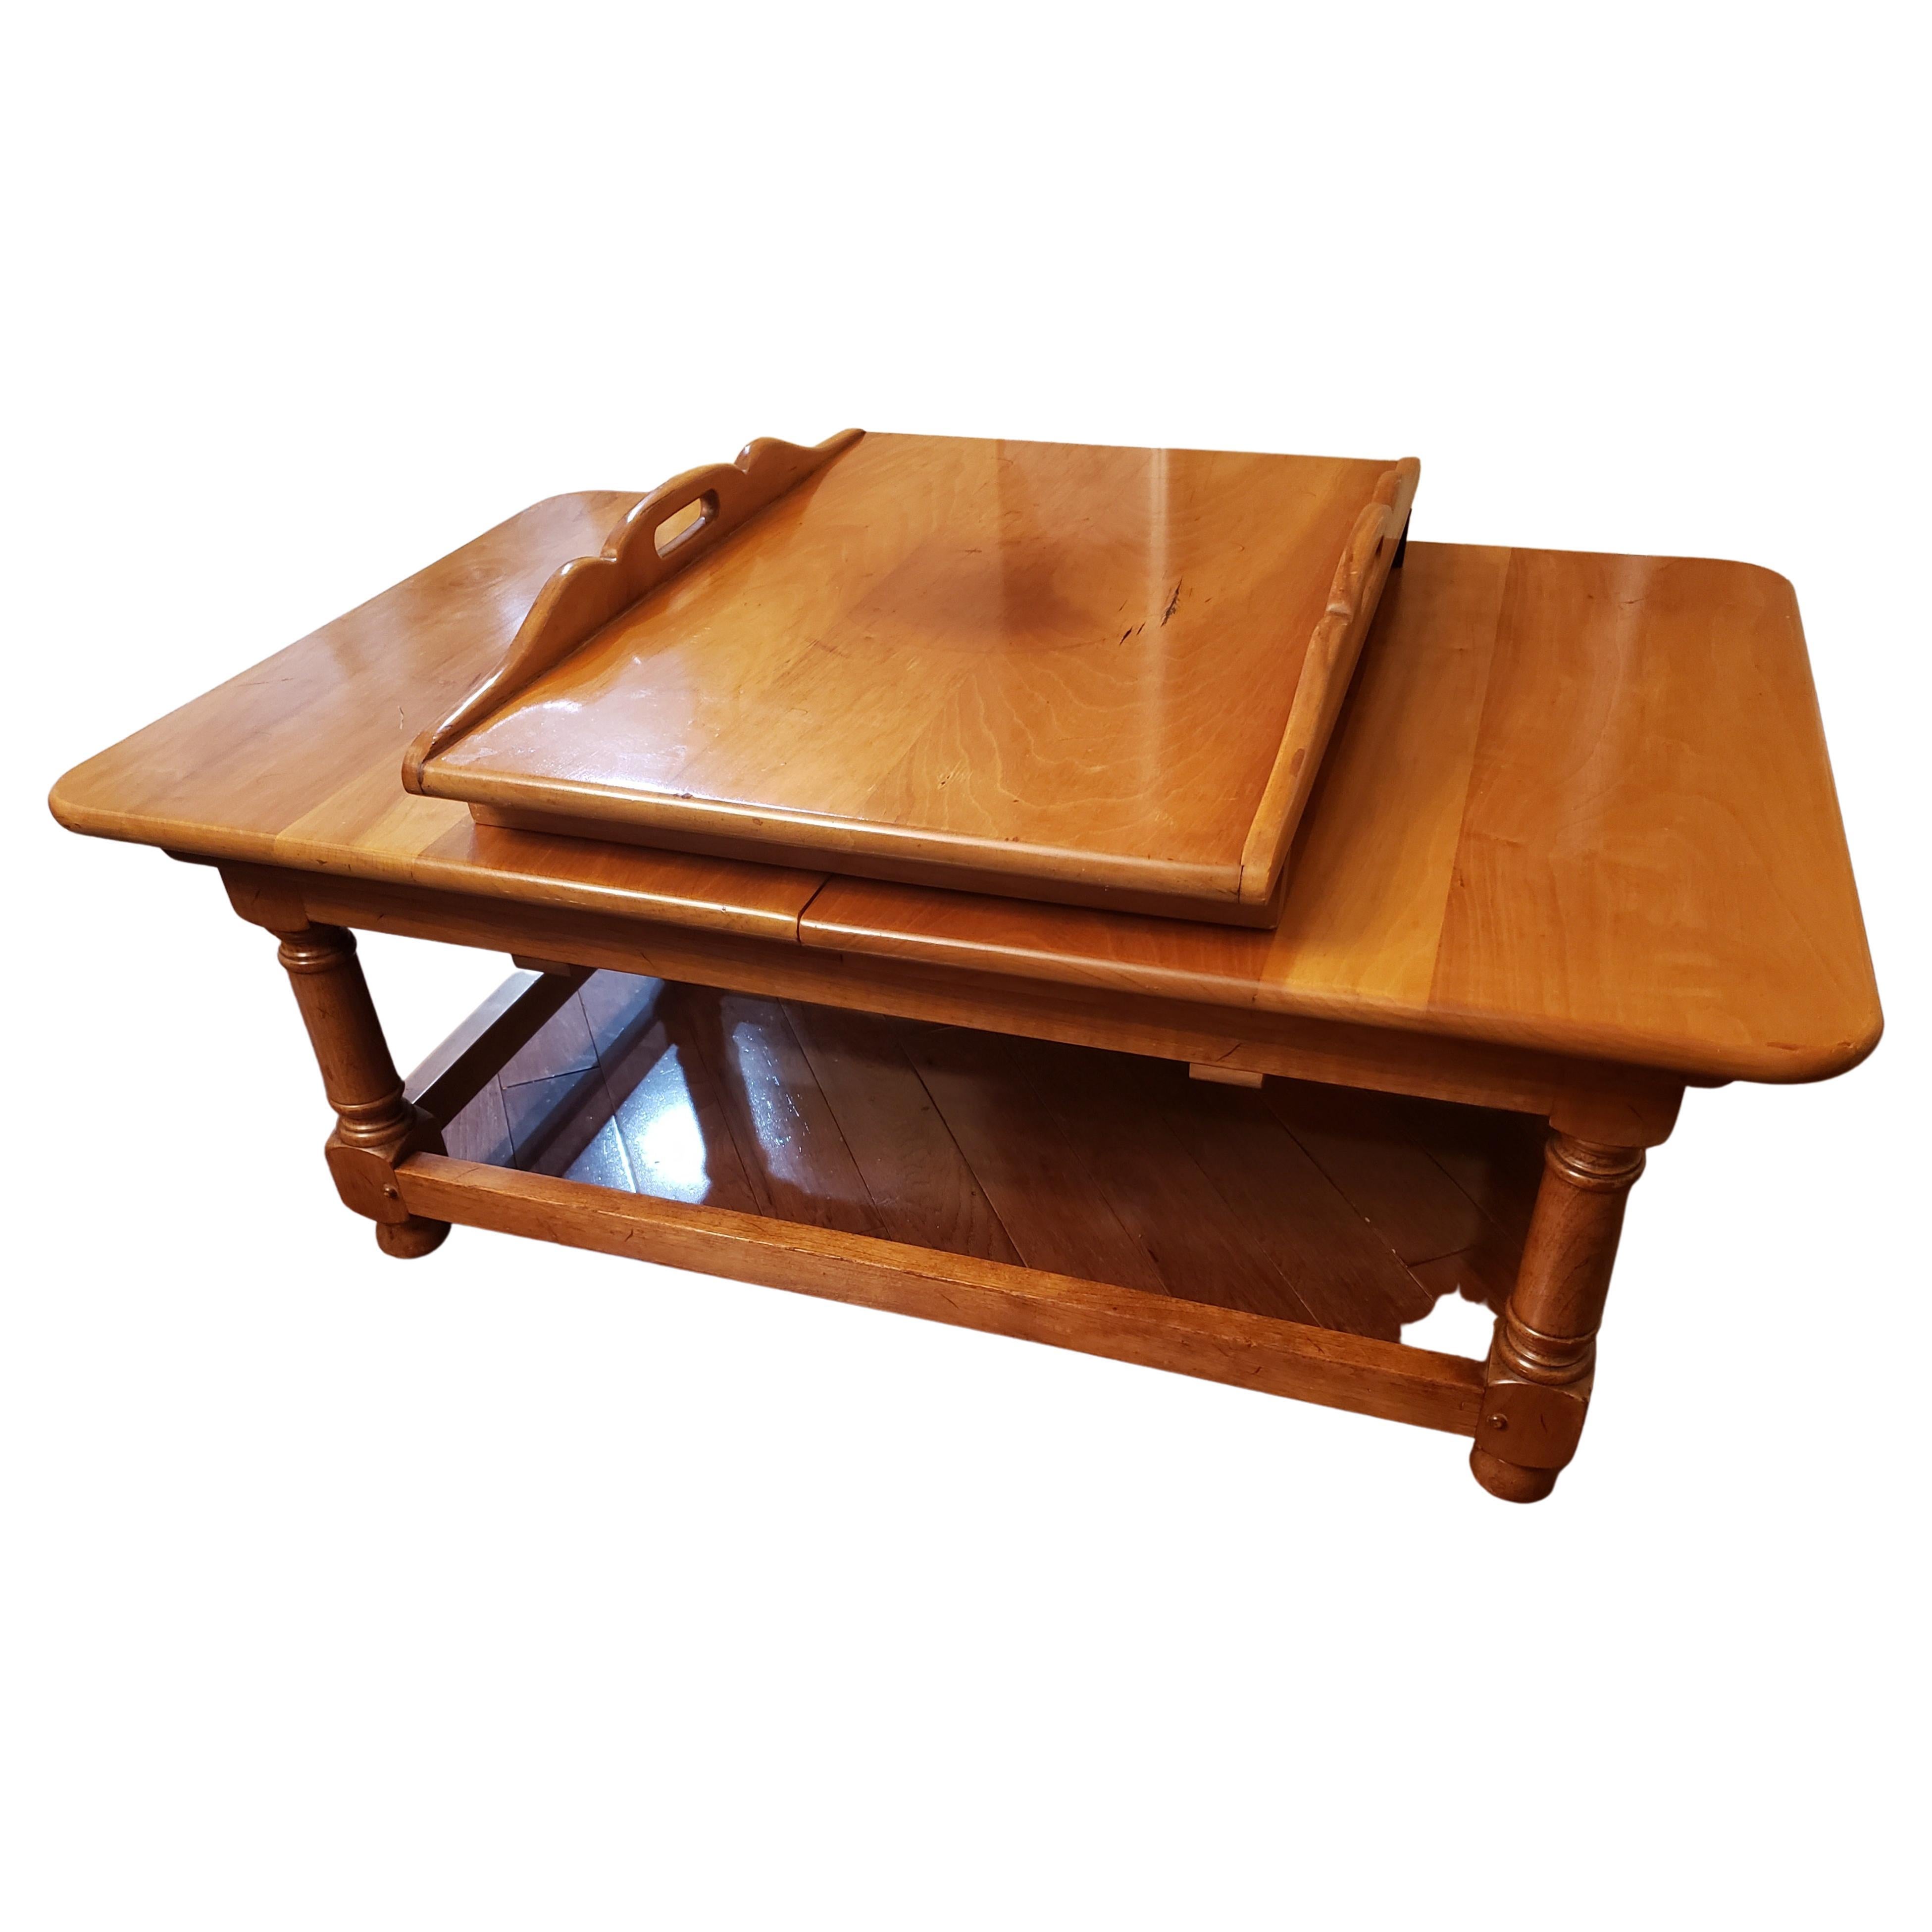 American Stickley Solid Maple Extending Coffee Tray Table, Circa 1950s